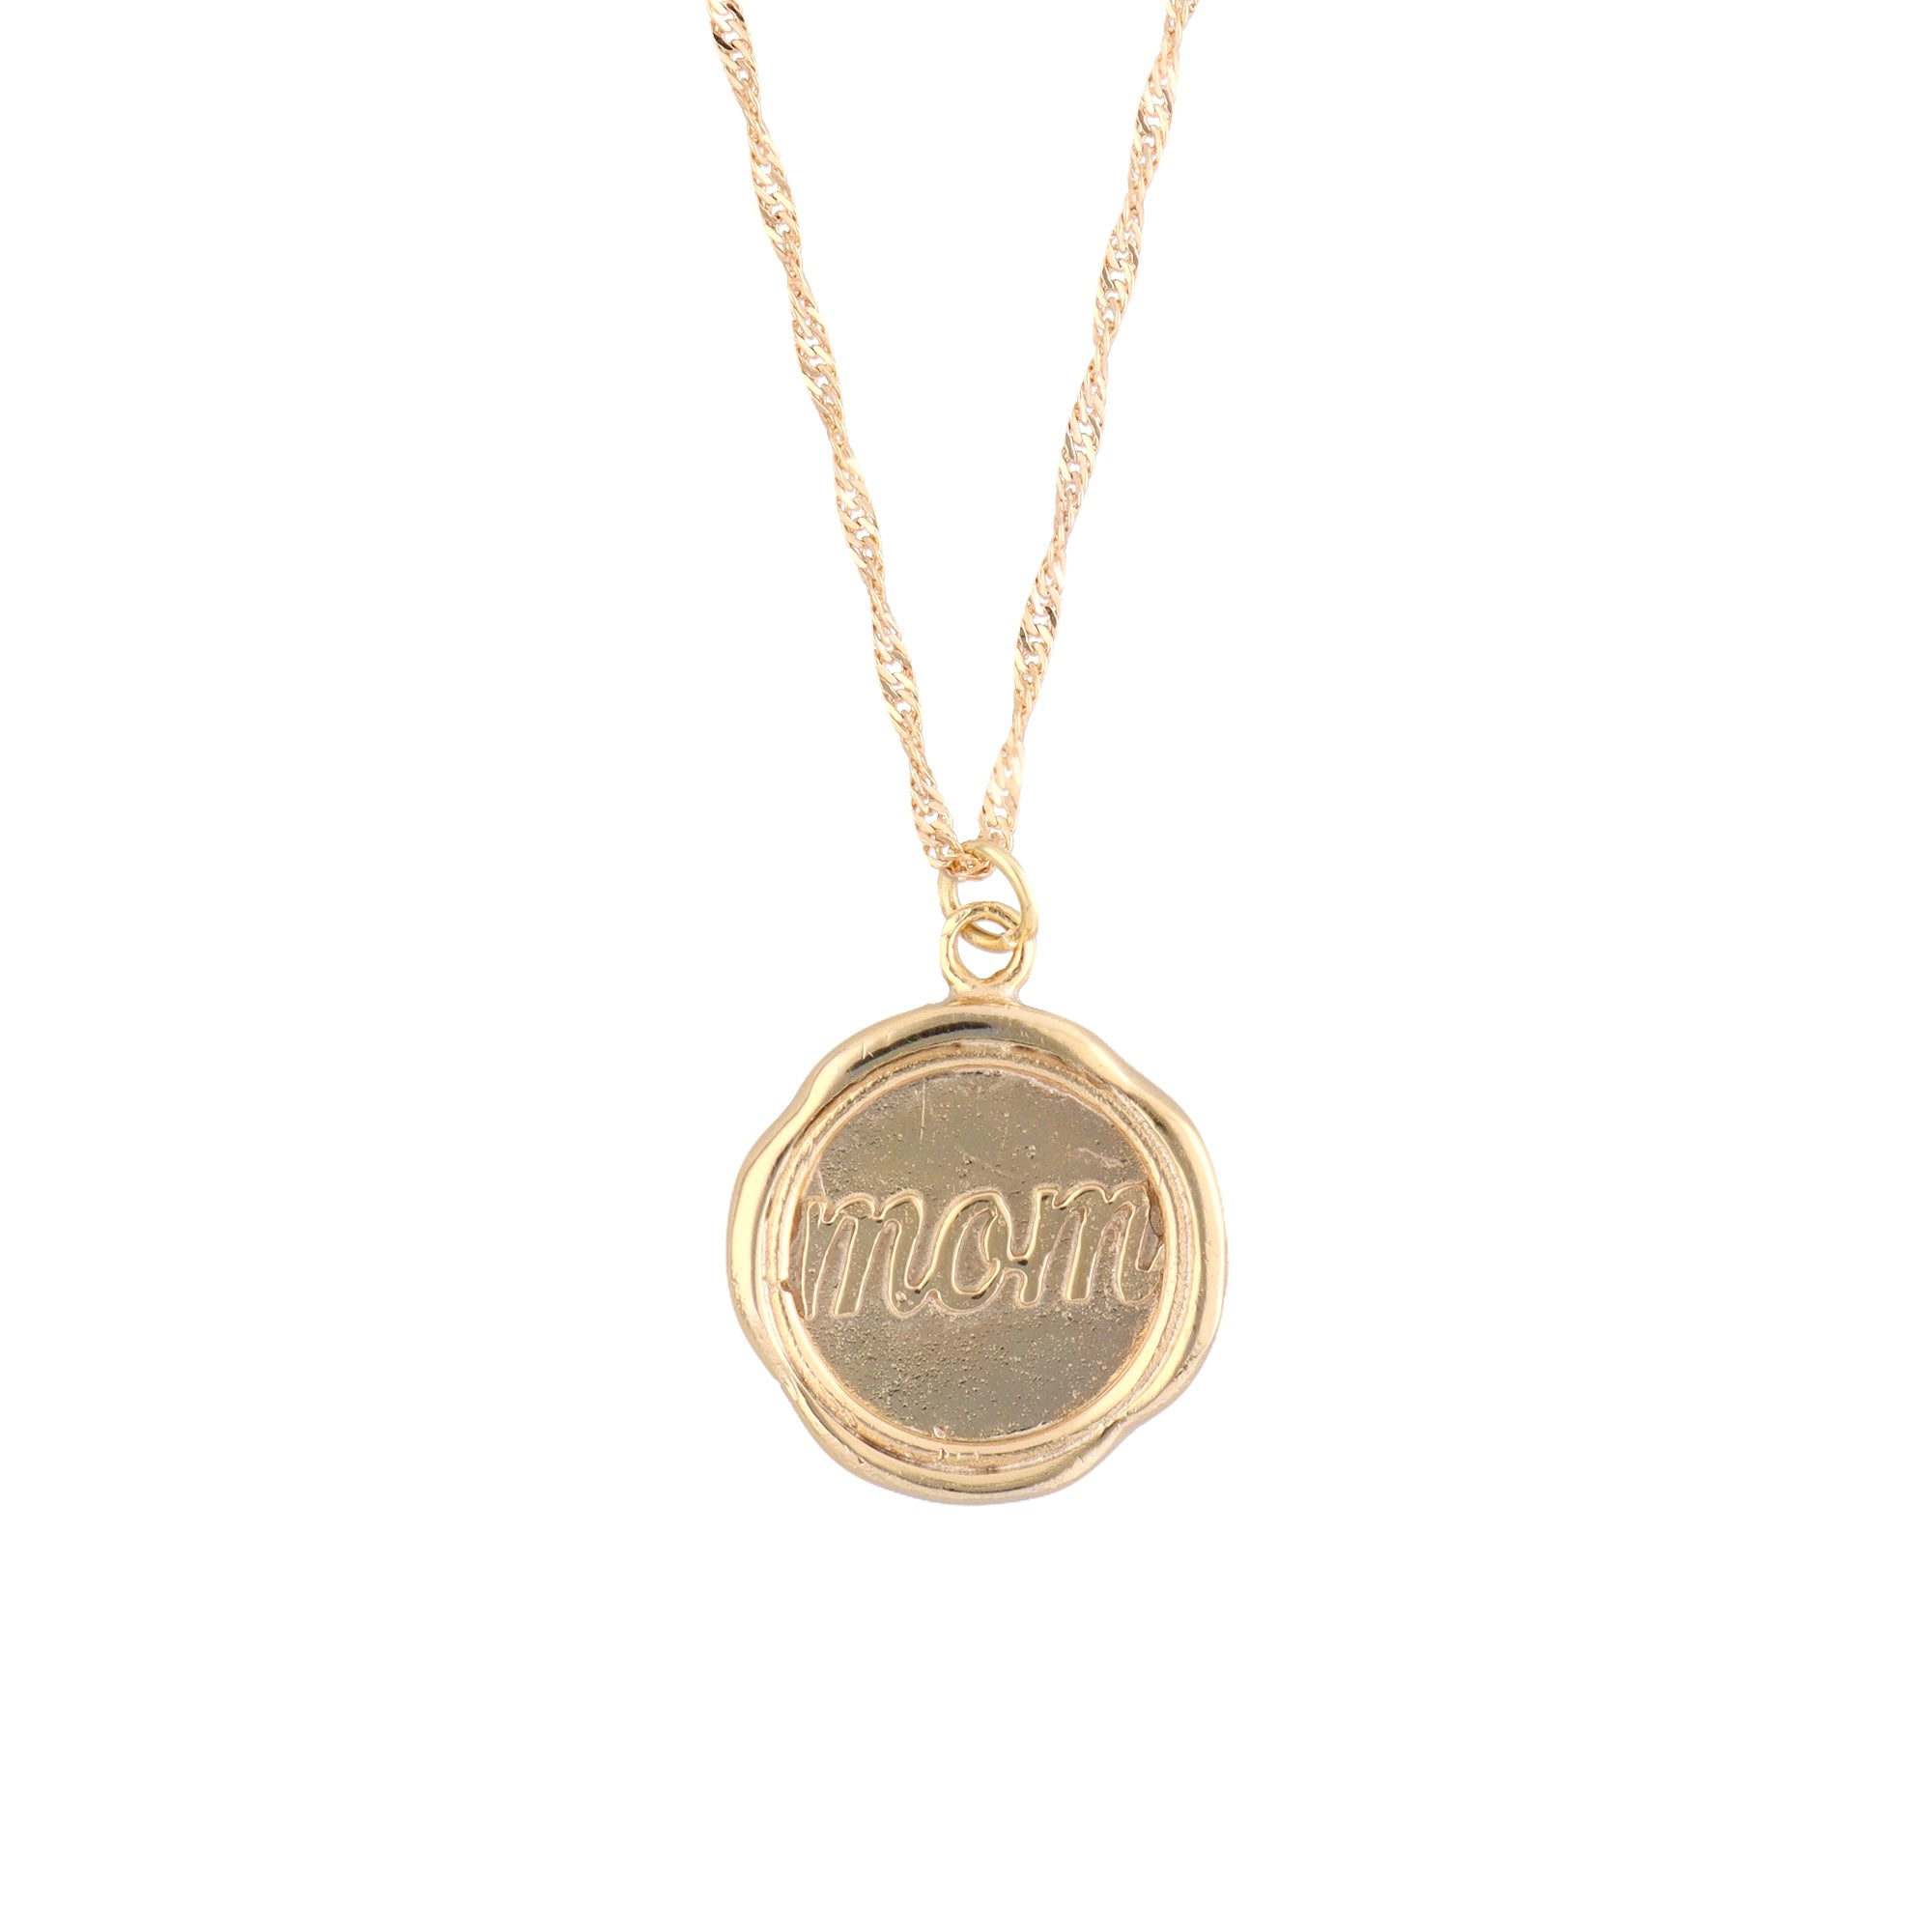 Mommy coin necklace